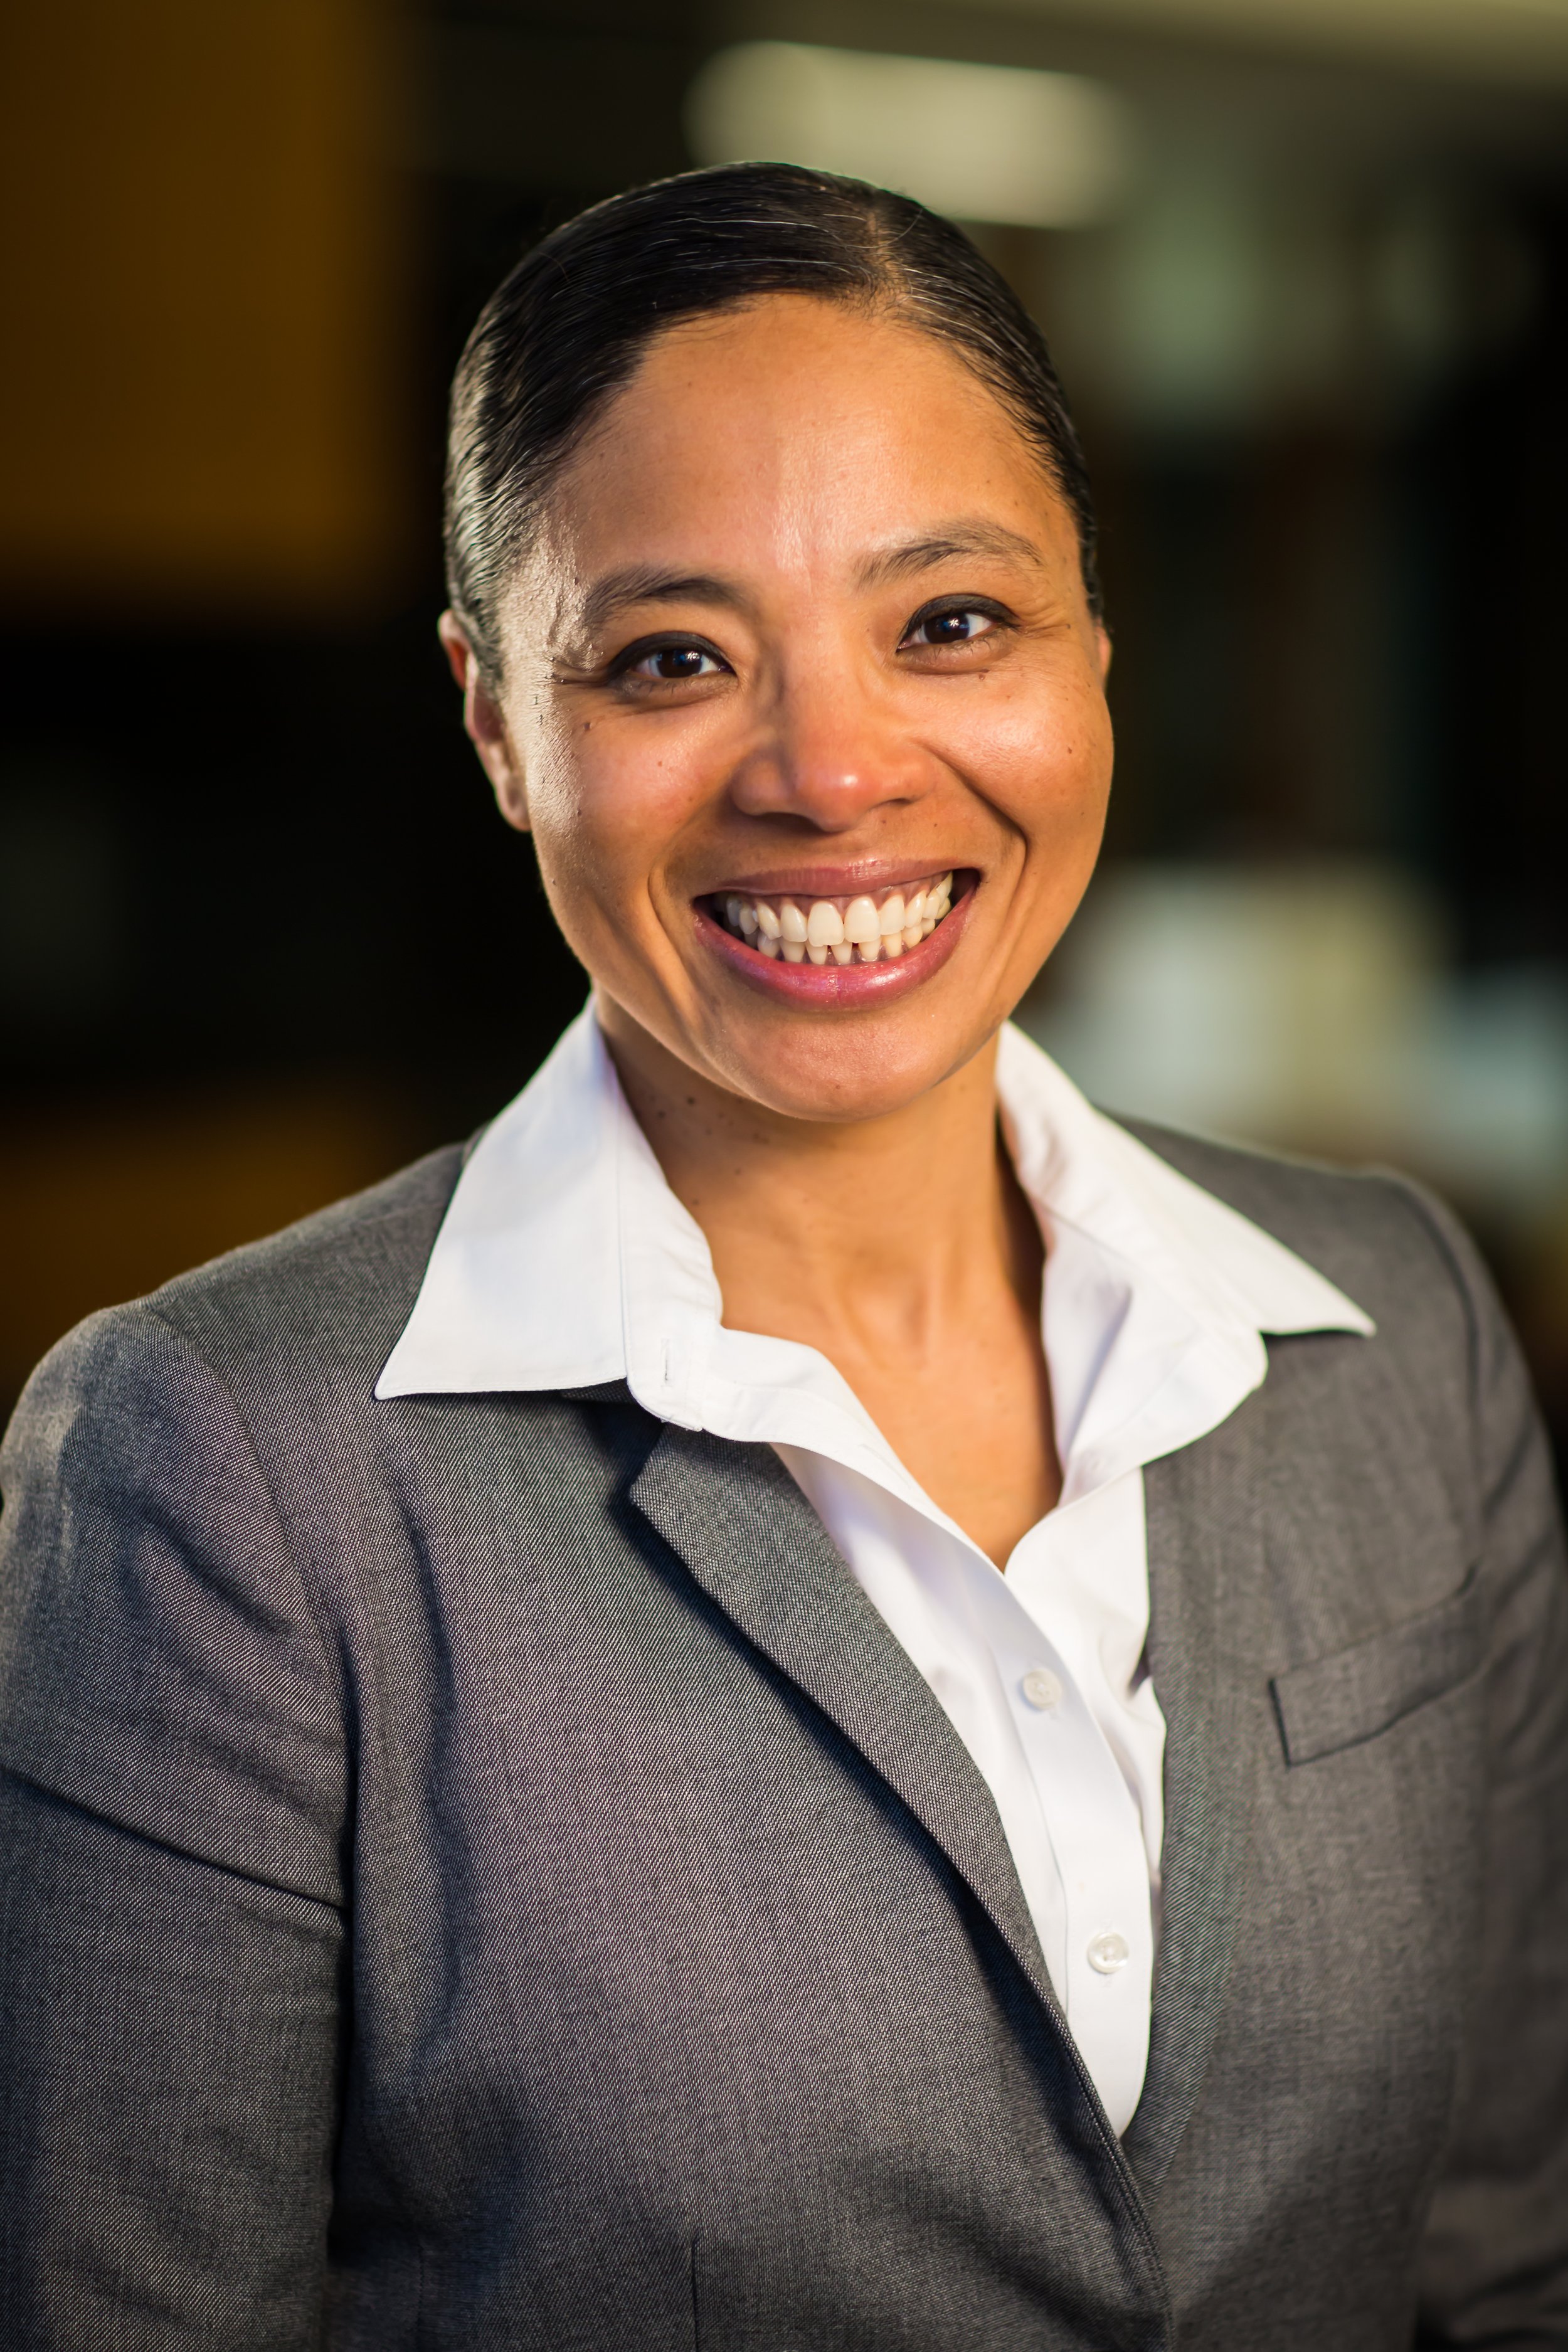 Dr. Maia Hightower, MD, MPH, MBA